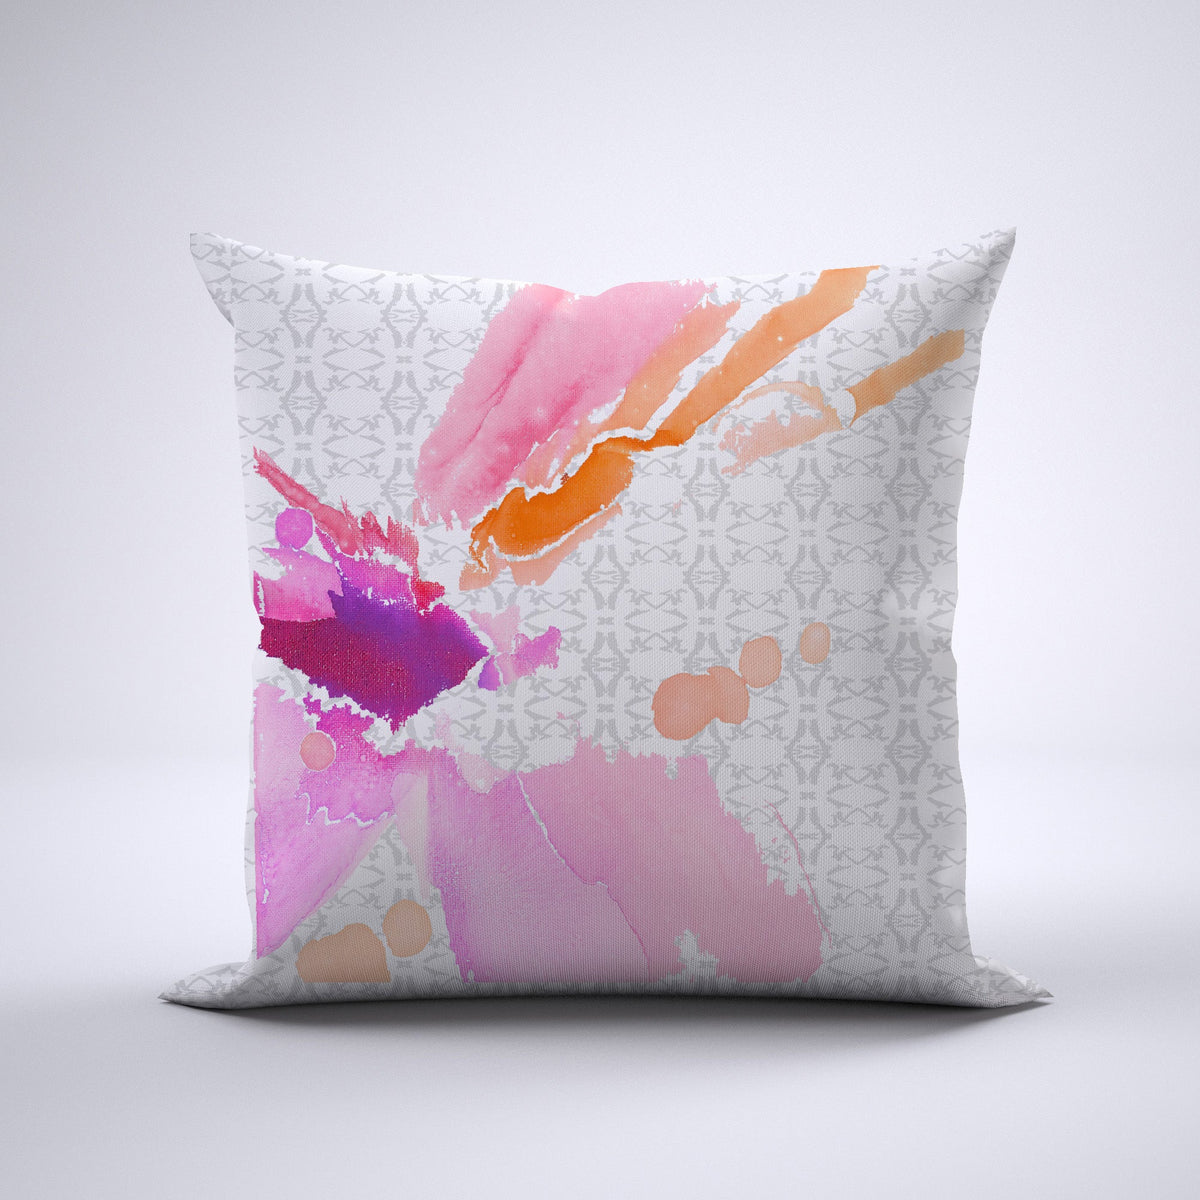 Throw Pillow - Painted Lady Pink Monarch Bedding Collections, Pillows, Throw Pillows MWW 